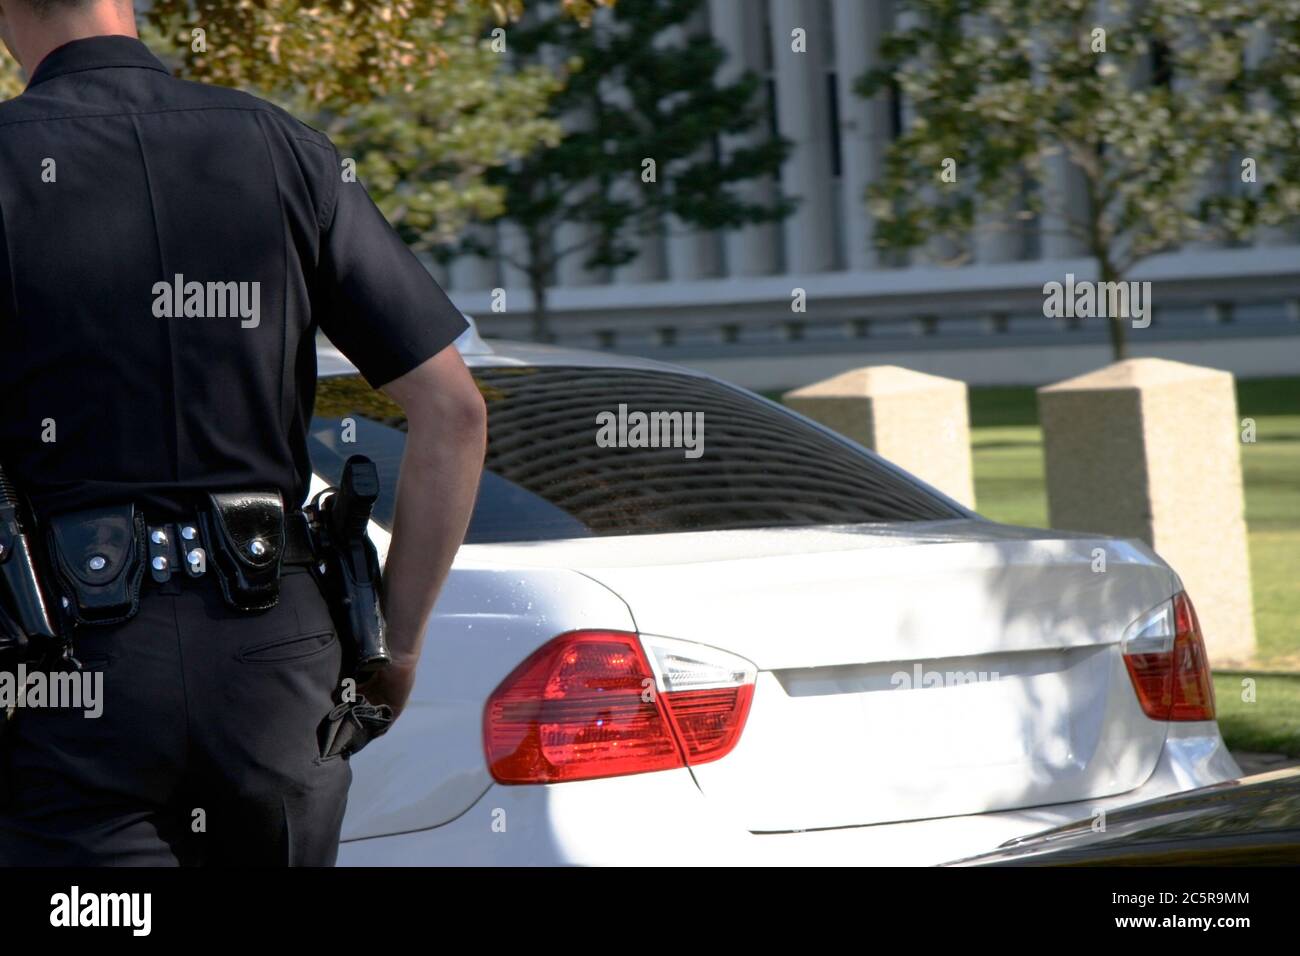 Rear view of traffic officer cautiously approaching stopped vehicle. Horizontal. Stock Photo